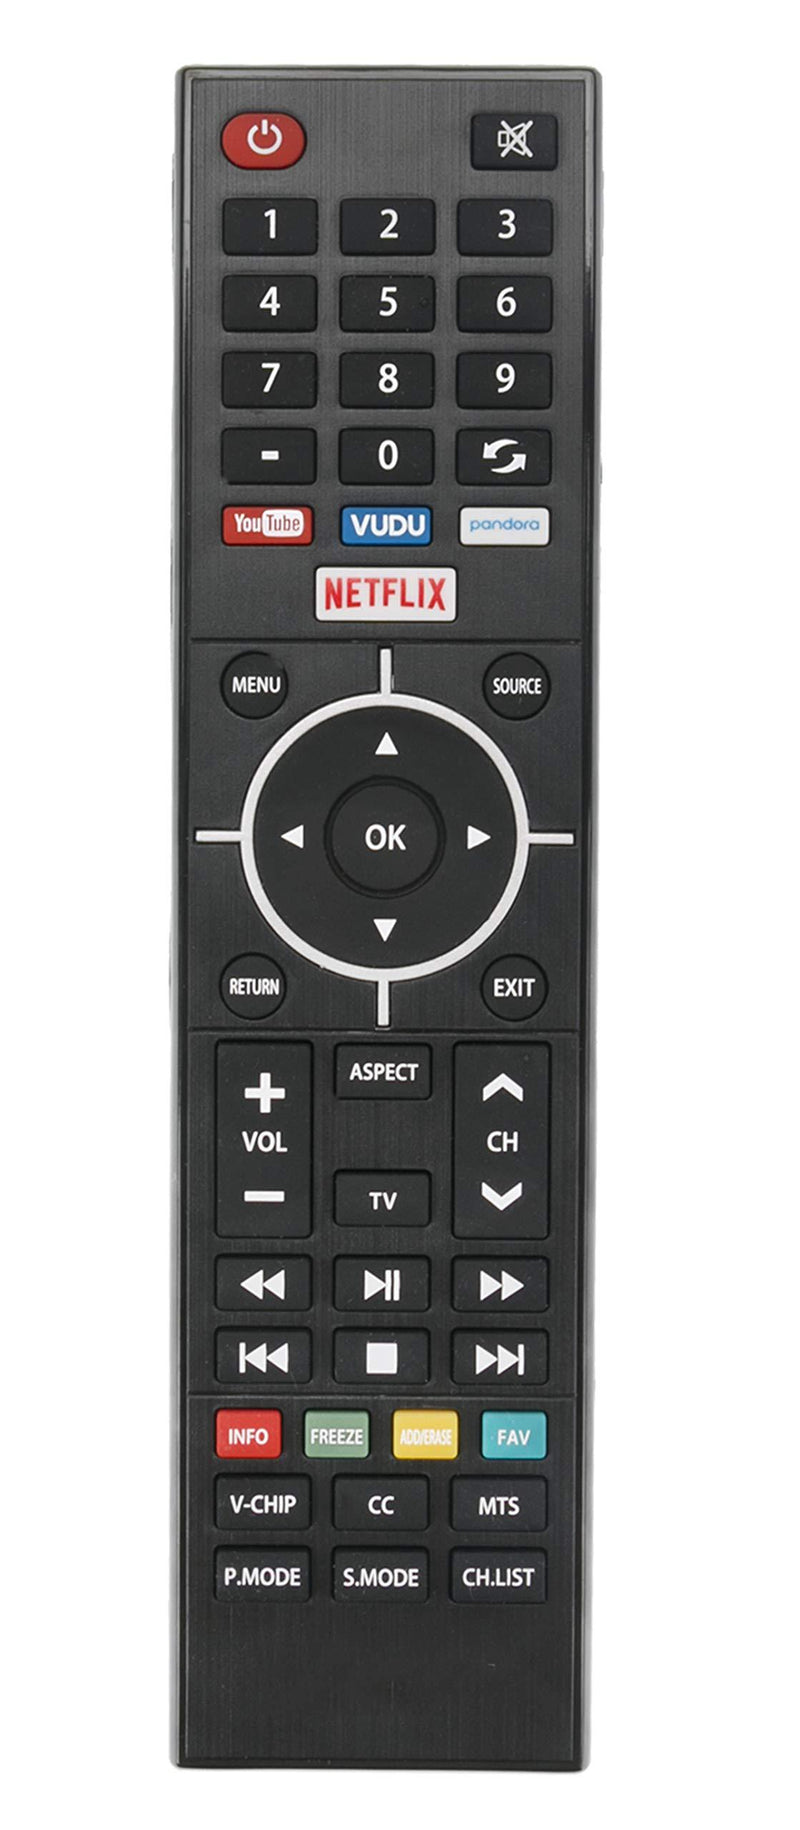 New Remote Control Compatible with Element Smart TV ELSW3917BF E4SFT5517 E4SFT5017 ELST3216H ELST5016S KY49C-178F ELSJ5017